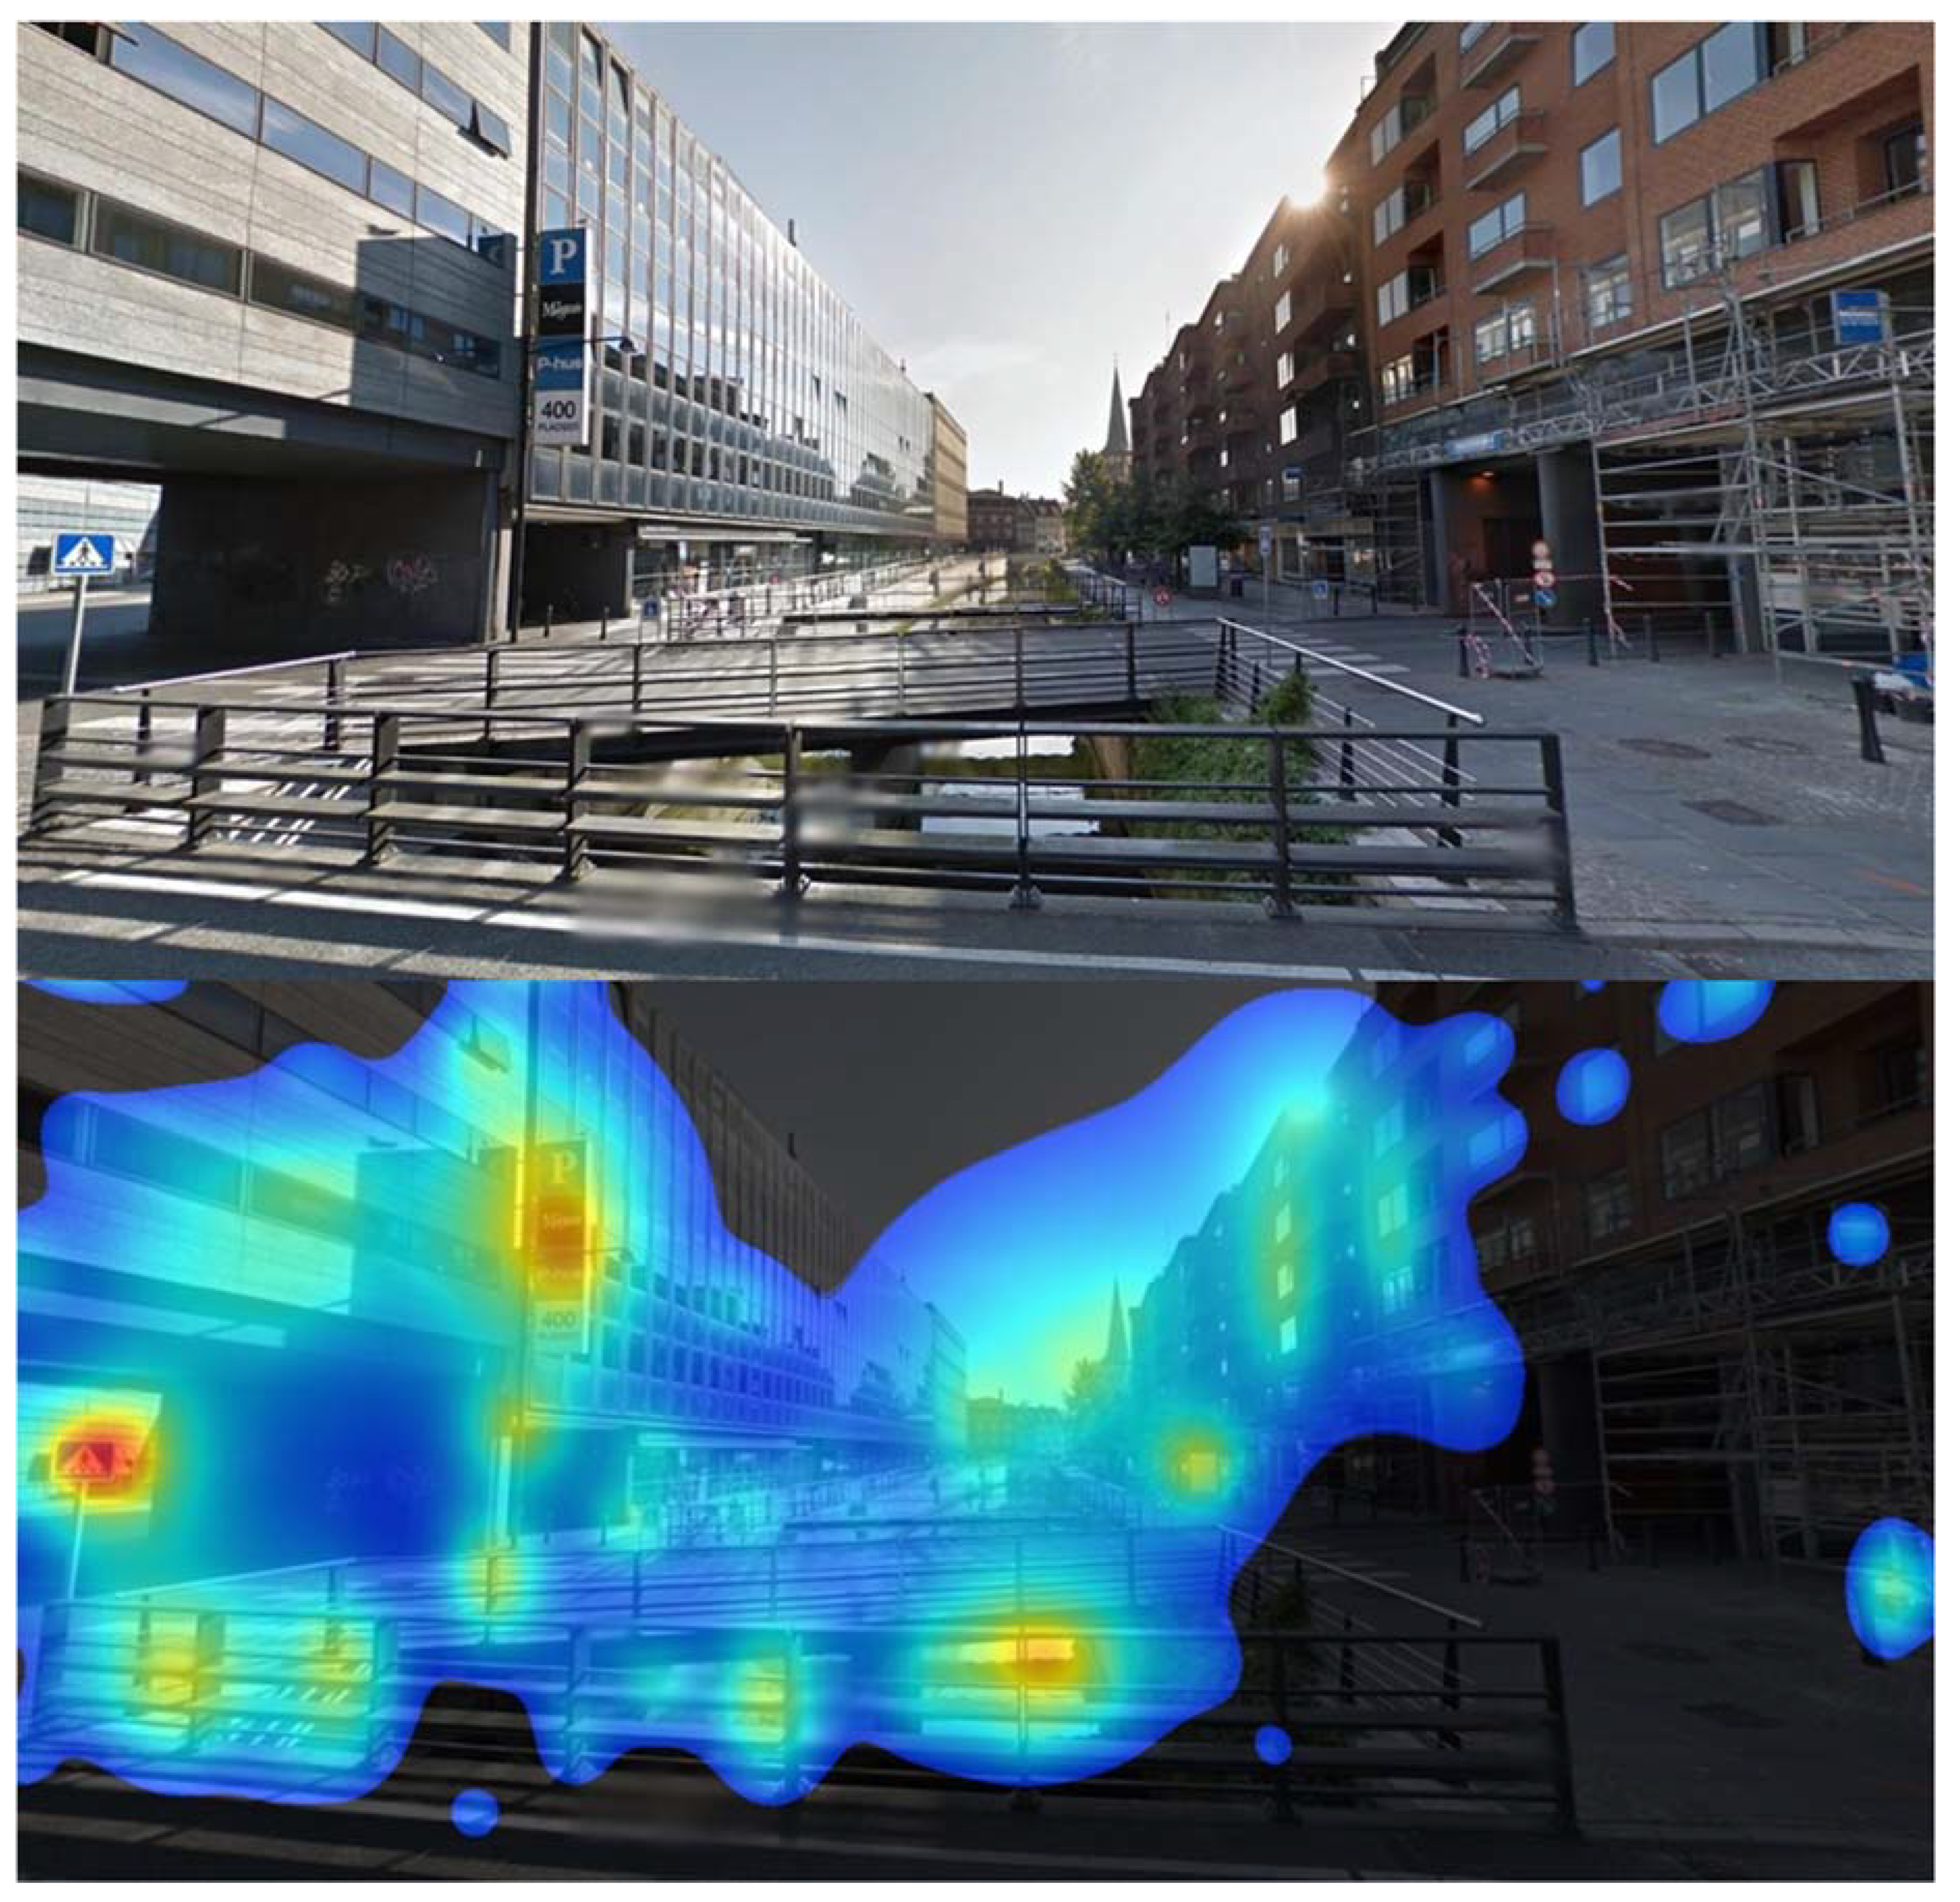 Sløset udredning Modsige Urban Science | Free Full-Text | What Happens in Your Brain When You Walk  Down the Street? Implications of Architectural Proportions, Biophilia, and  Fractal Geometry for Urban Science